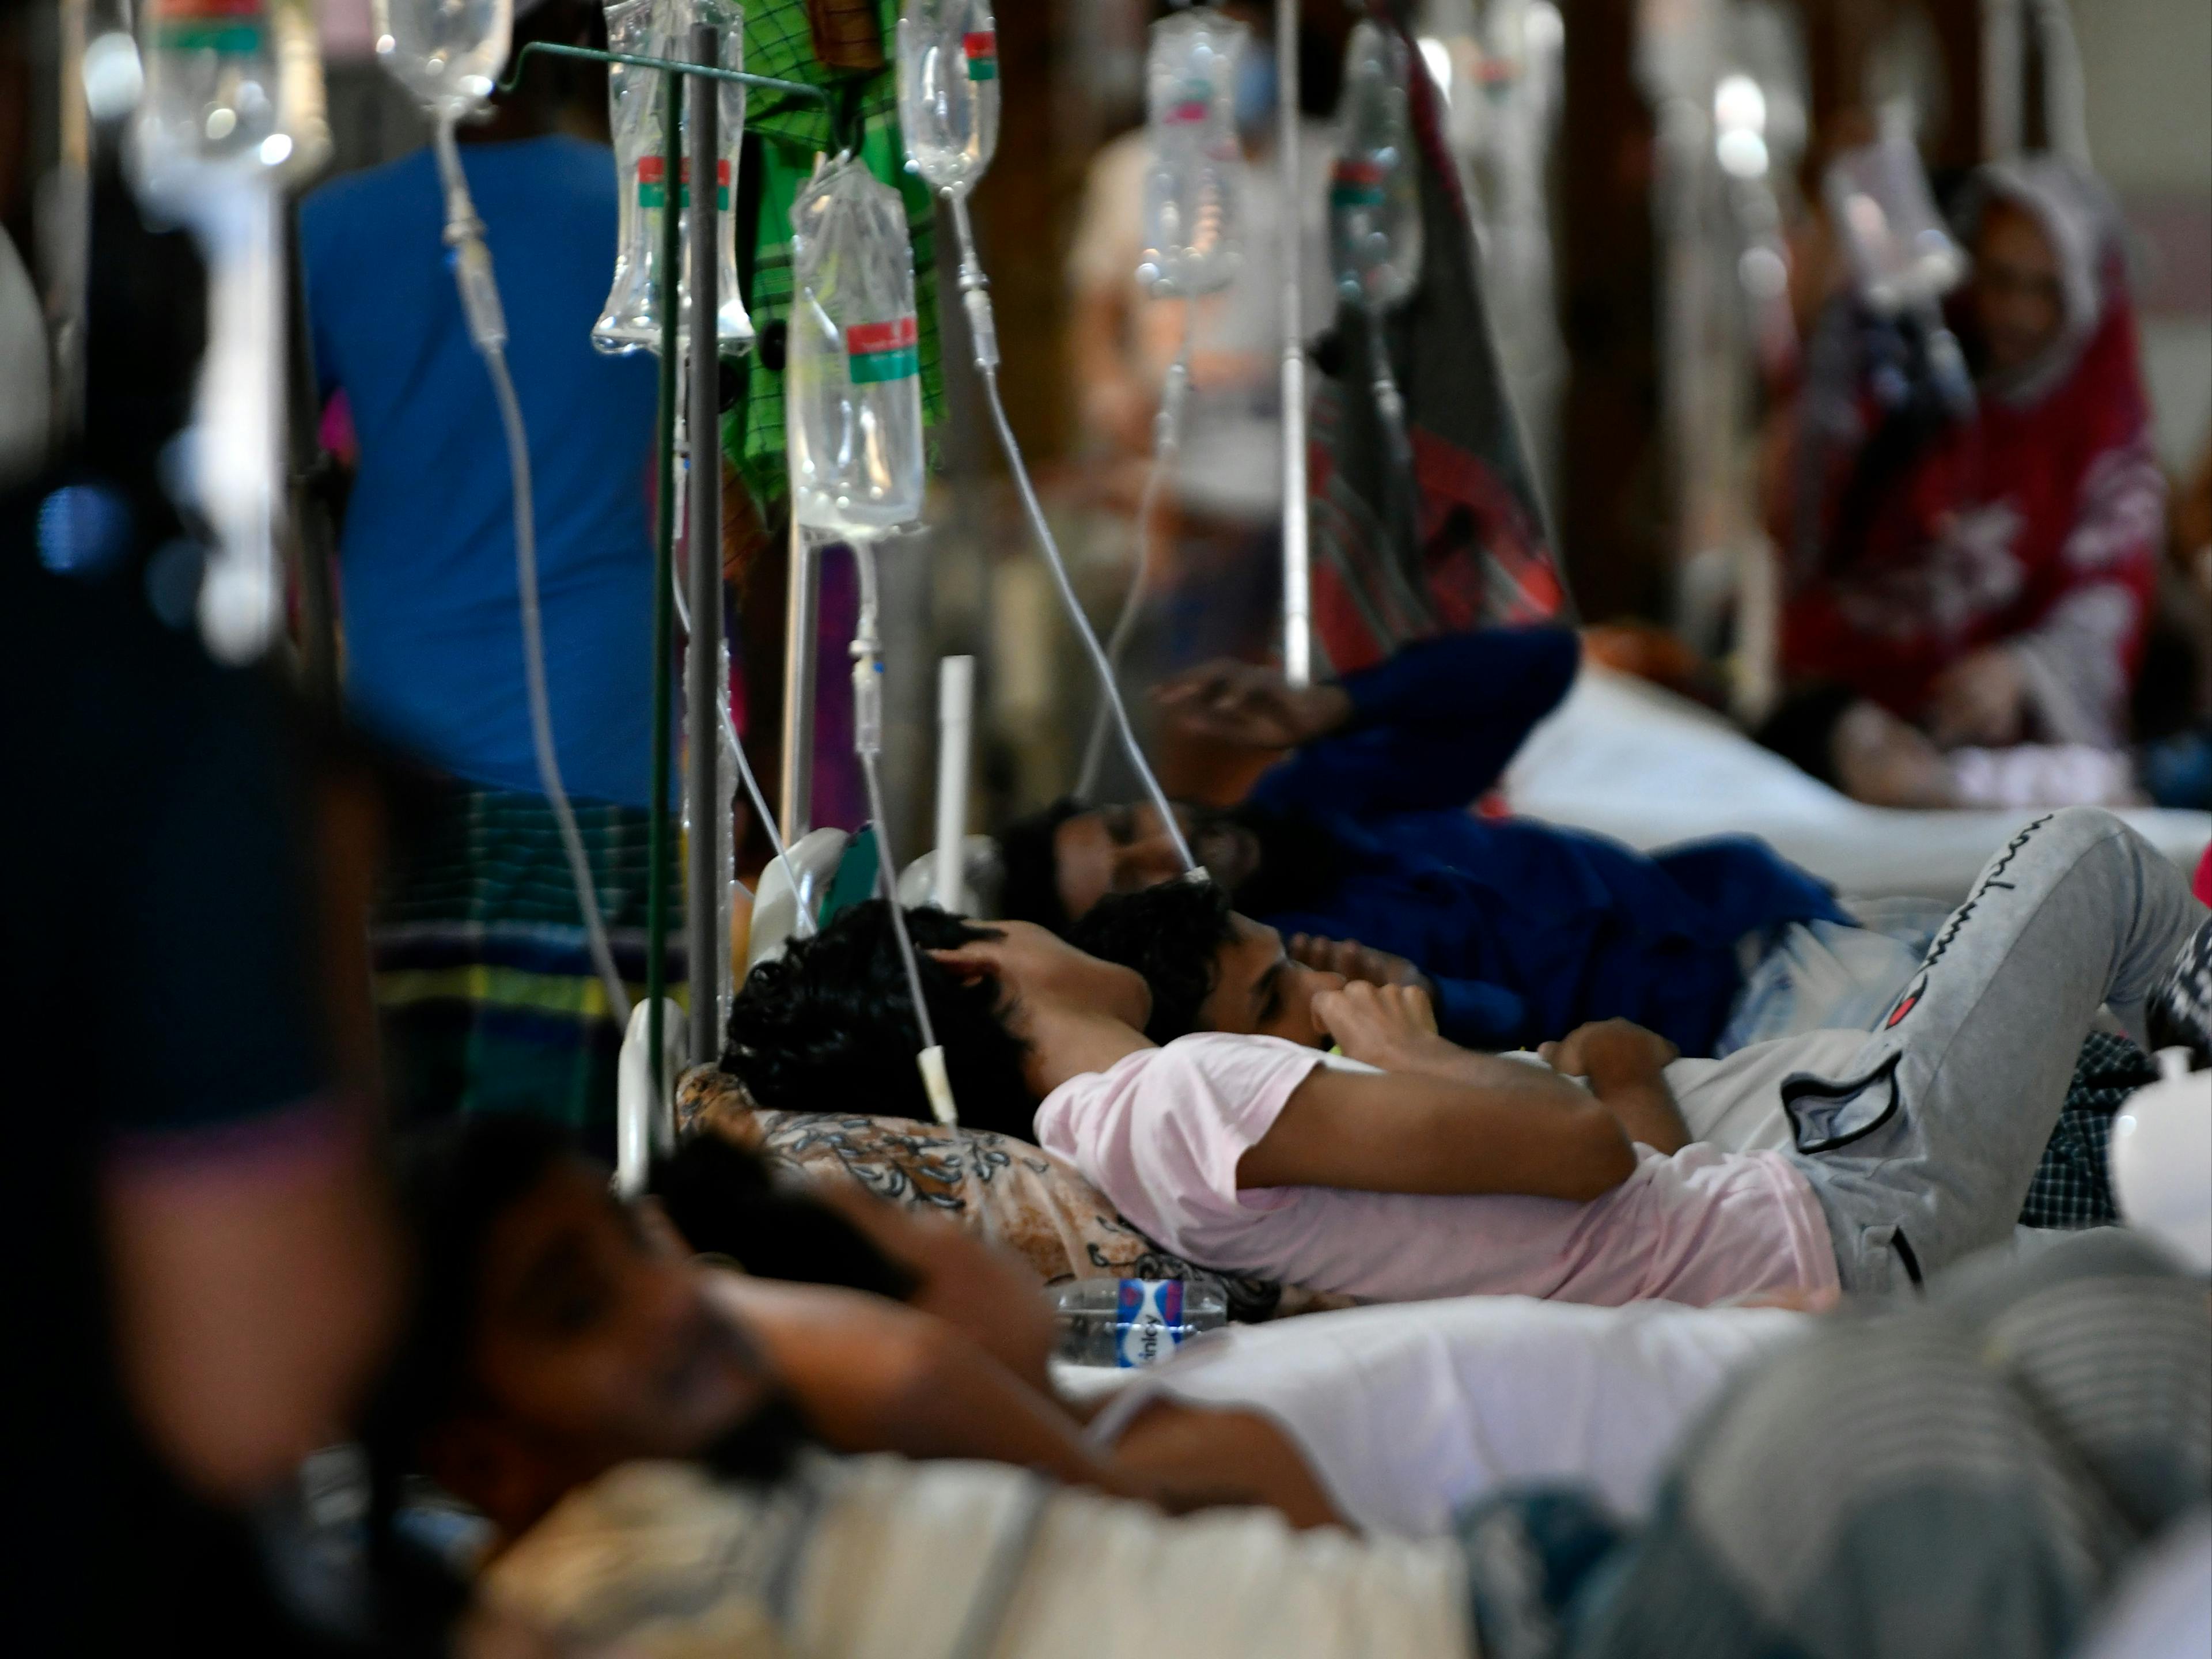 People suffering from dengue fever as they admitted for treatment at a government hospital in Dhaka, Bangladesh, on June 05, 2023. (Photo by Syed Mahamudur Rahman/NurPhoto via Getty Images)

